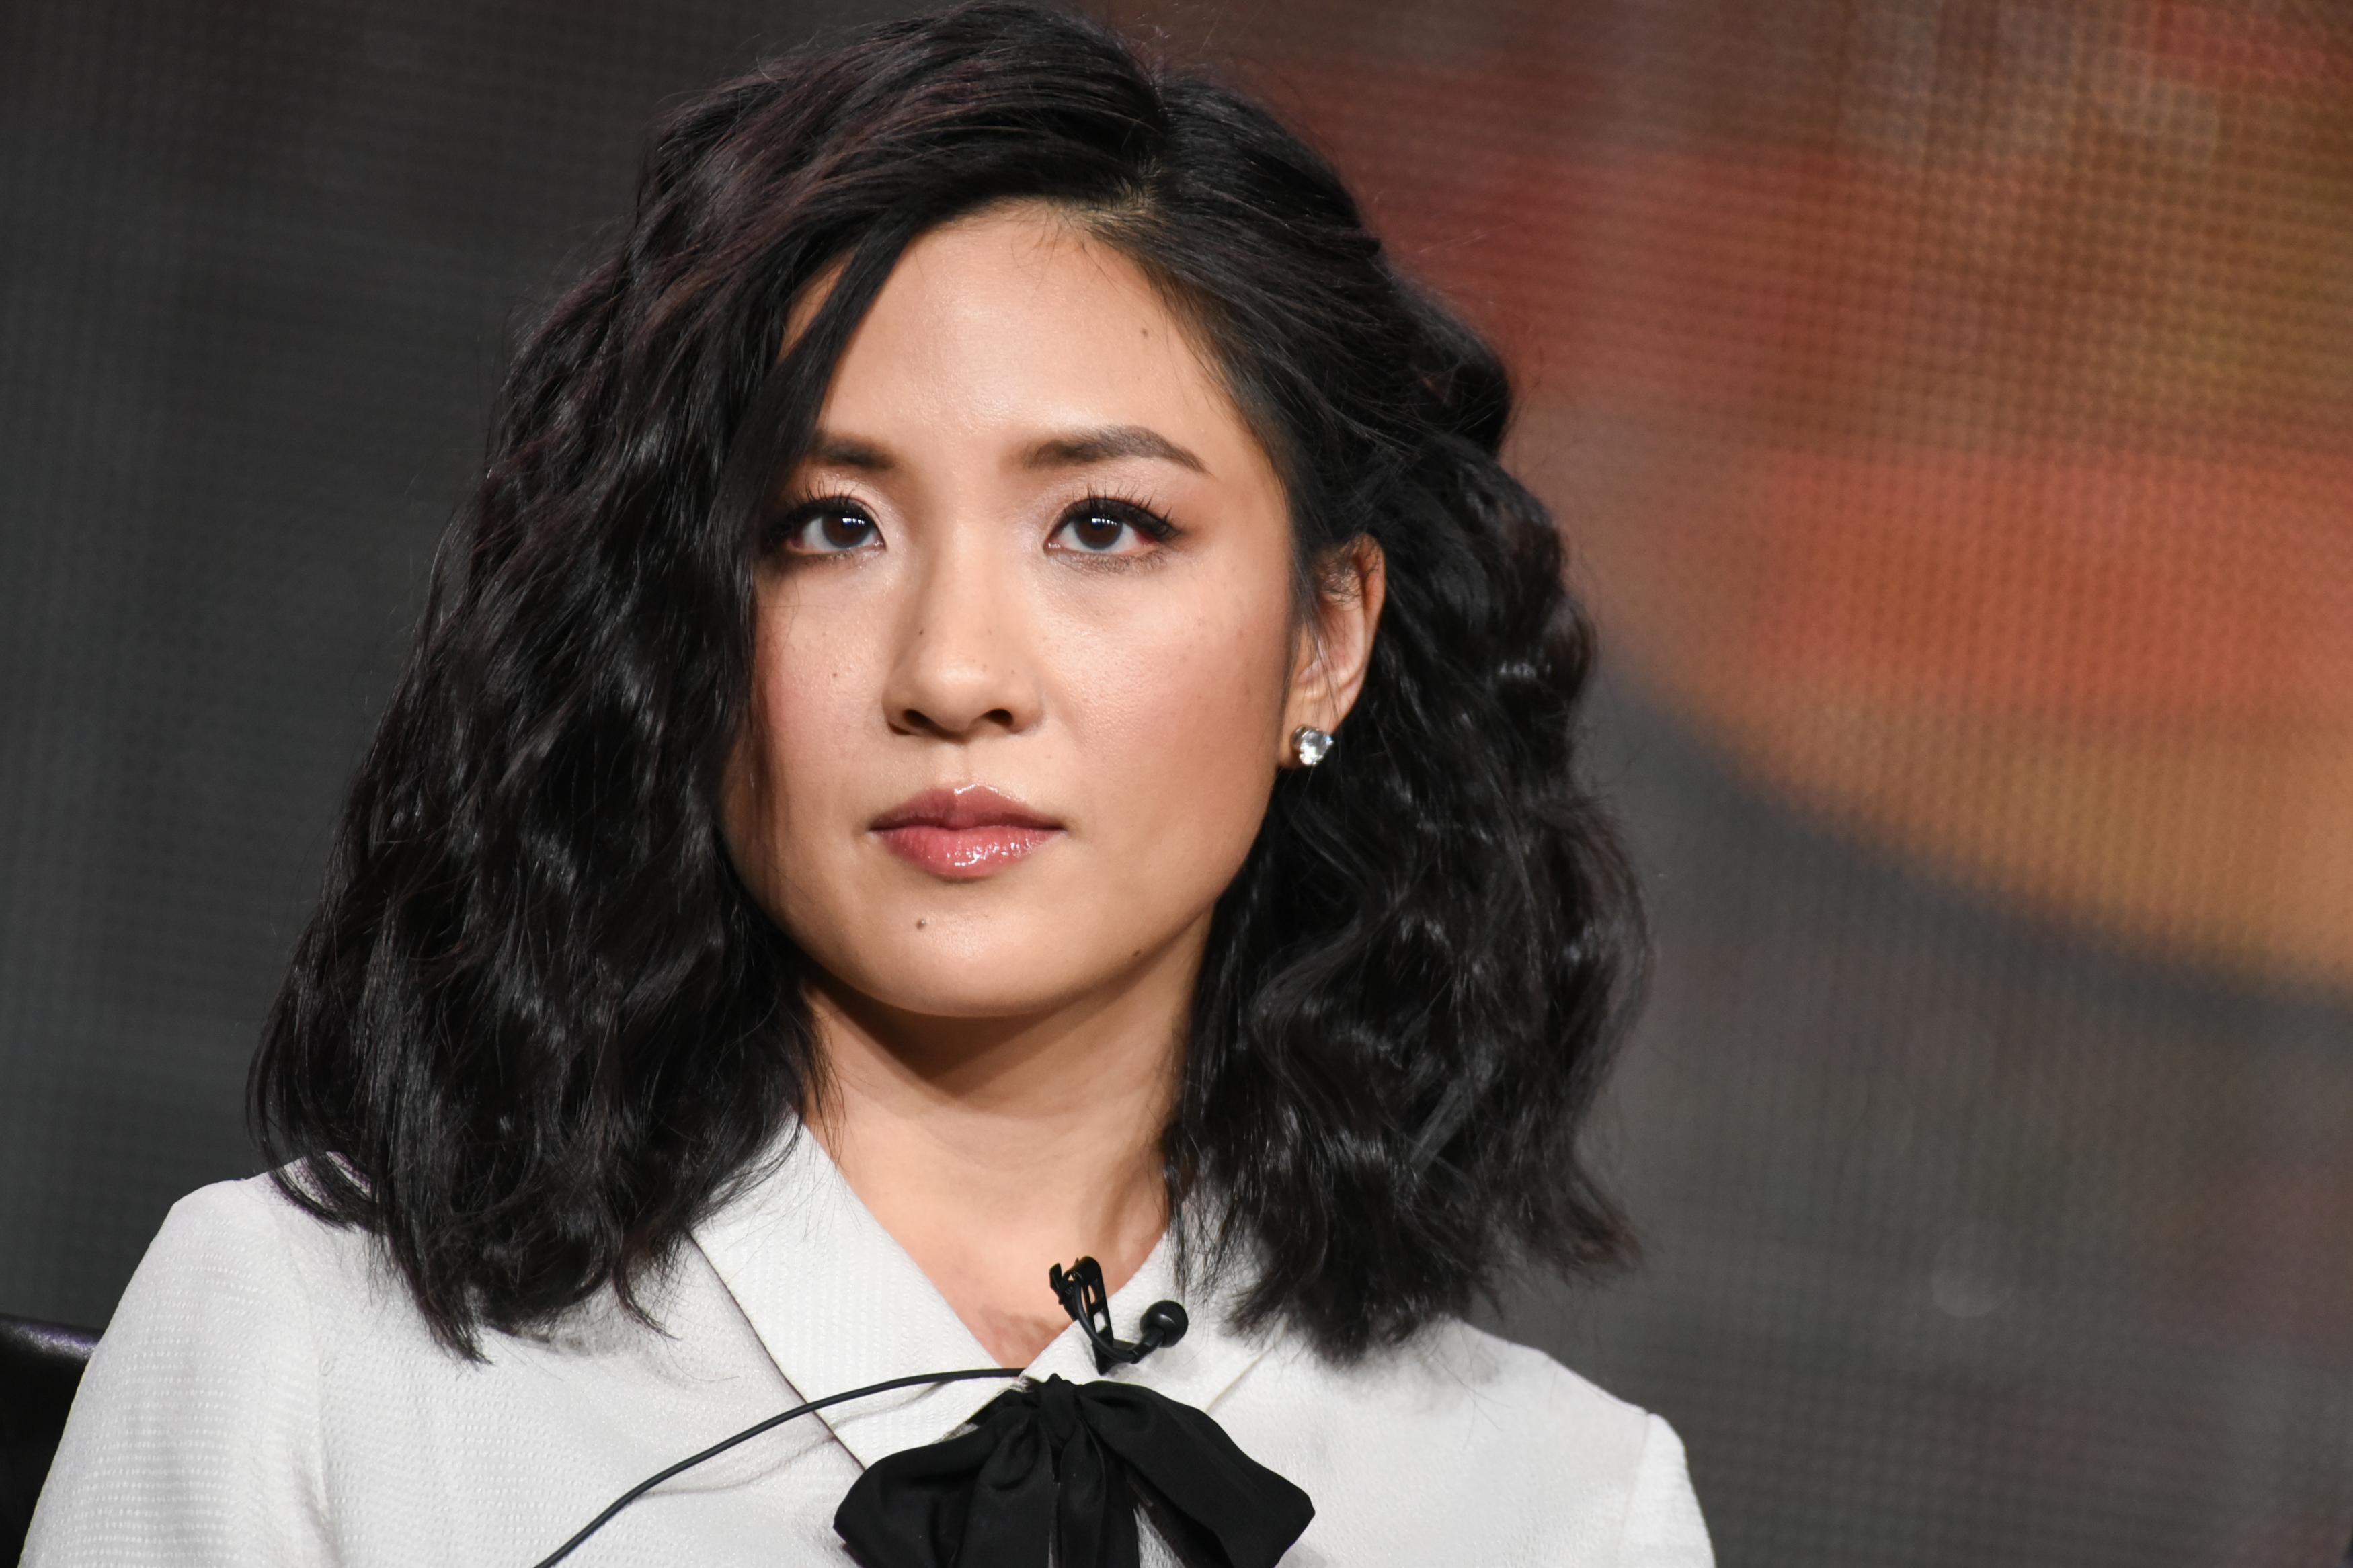 Fresh Off the Boat's Constance Wu Talks Accents and Authenticity